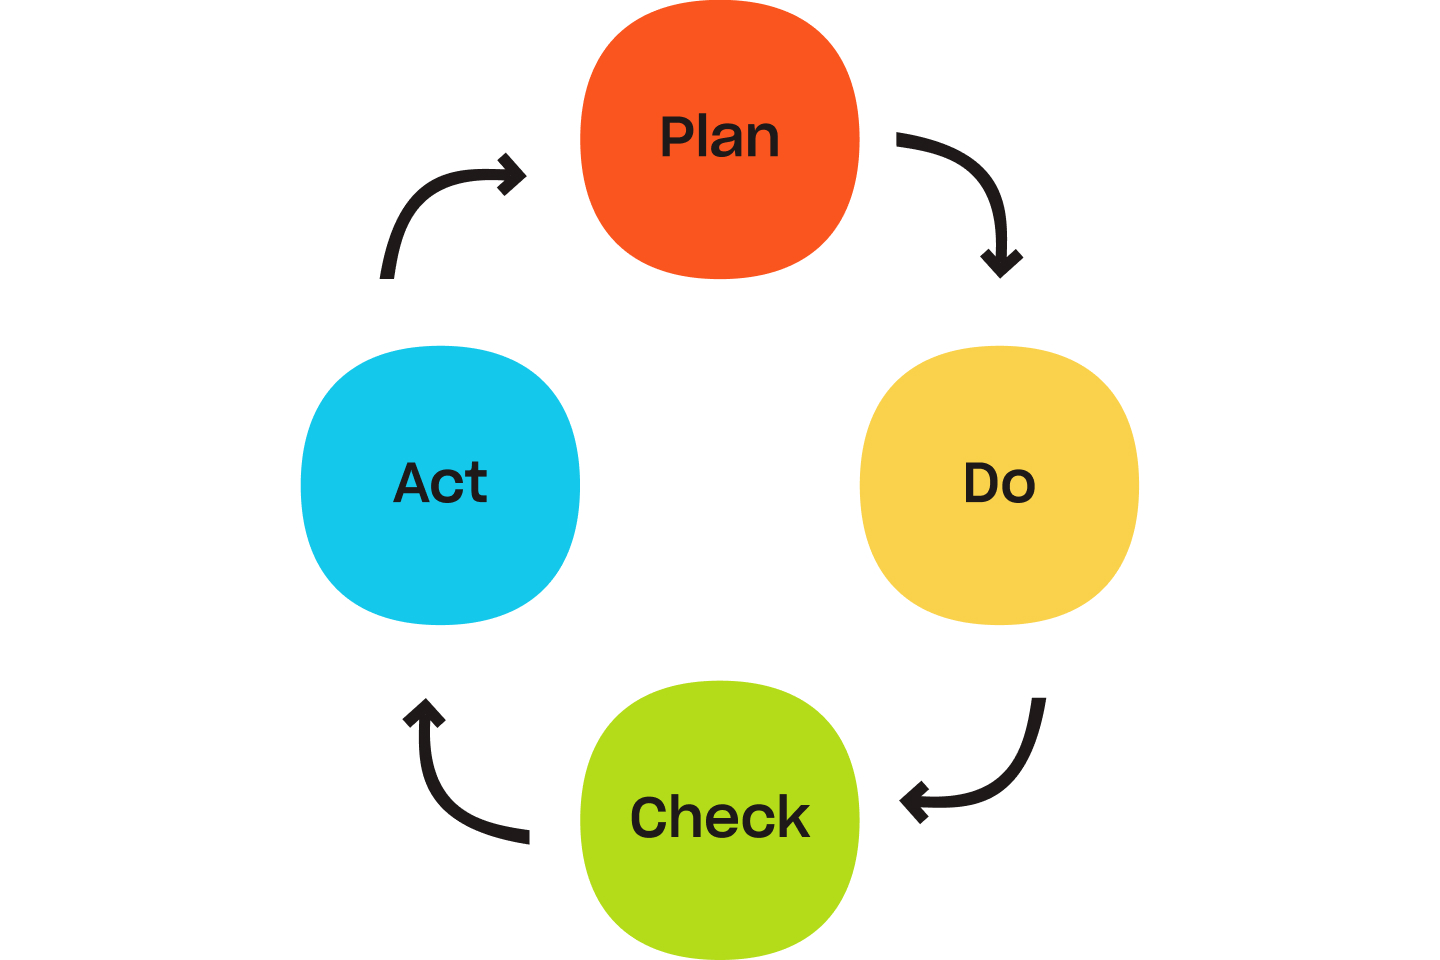 A Plan, Do, Check, Act cycle, which shows a continuous loop of planning, doing, checking and acting.